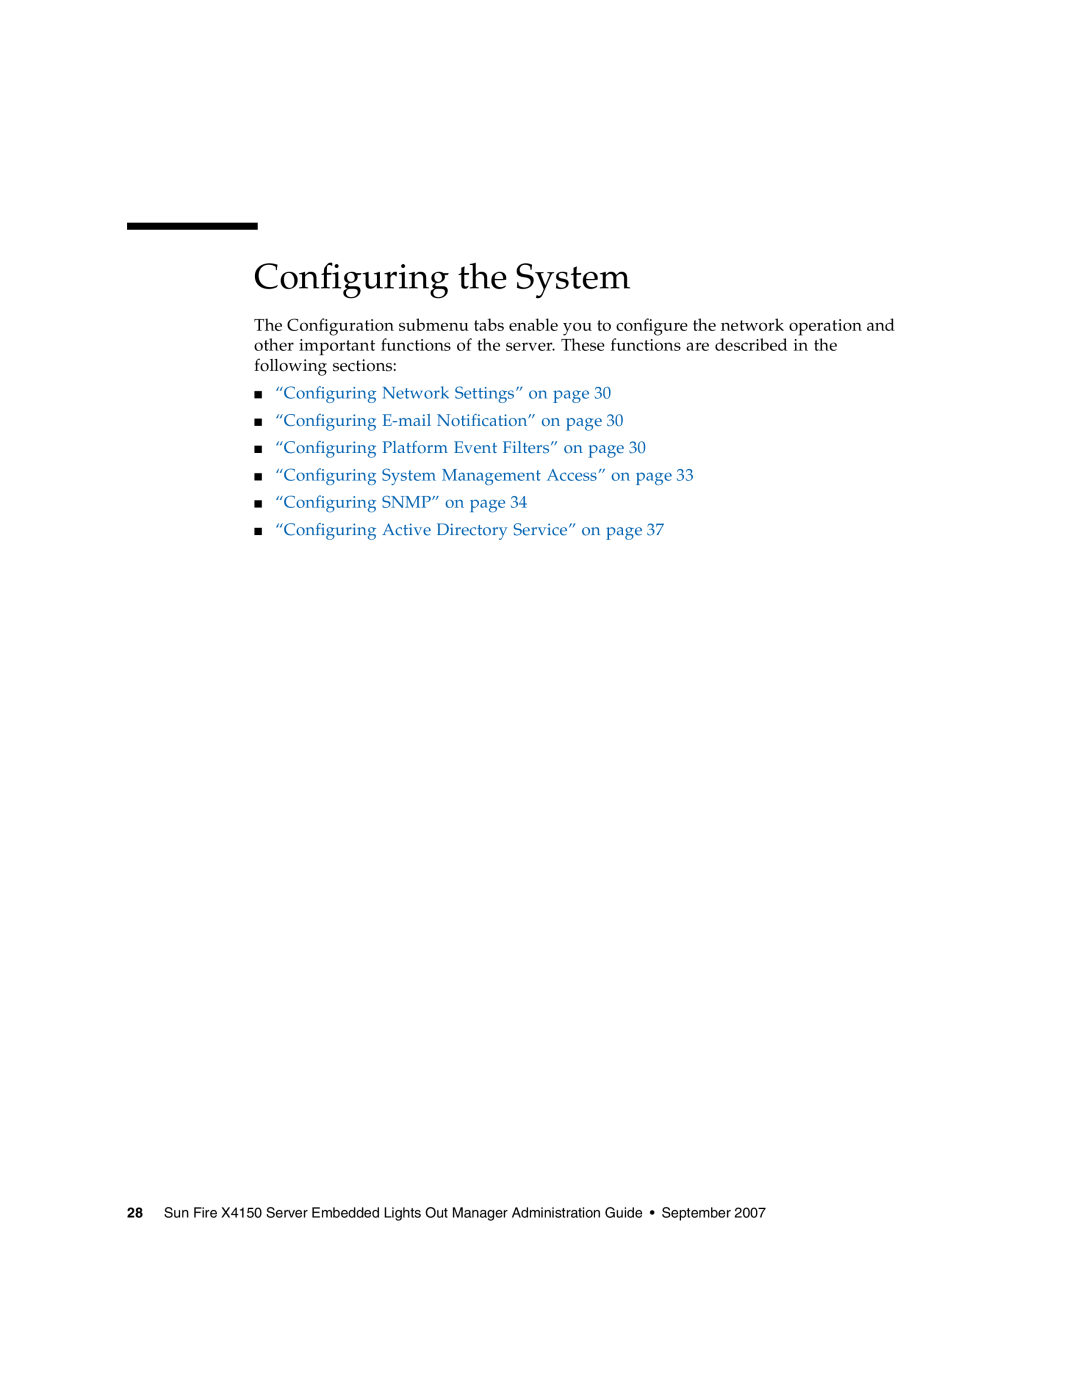 Sun Microsystems X4150 manual Configuring the System, “Configuring Network Settings” on page, “Configuring SNMP” on page 